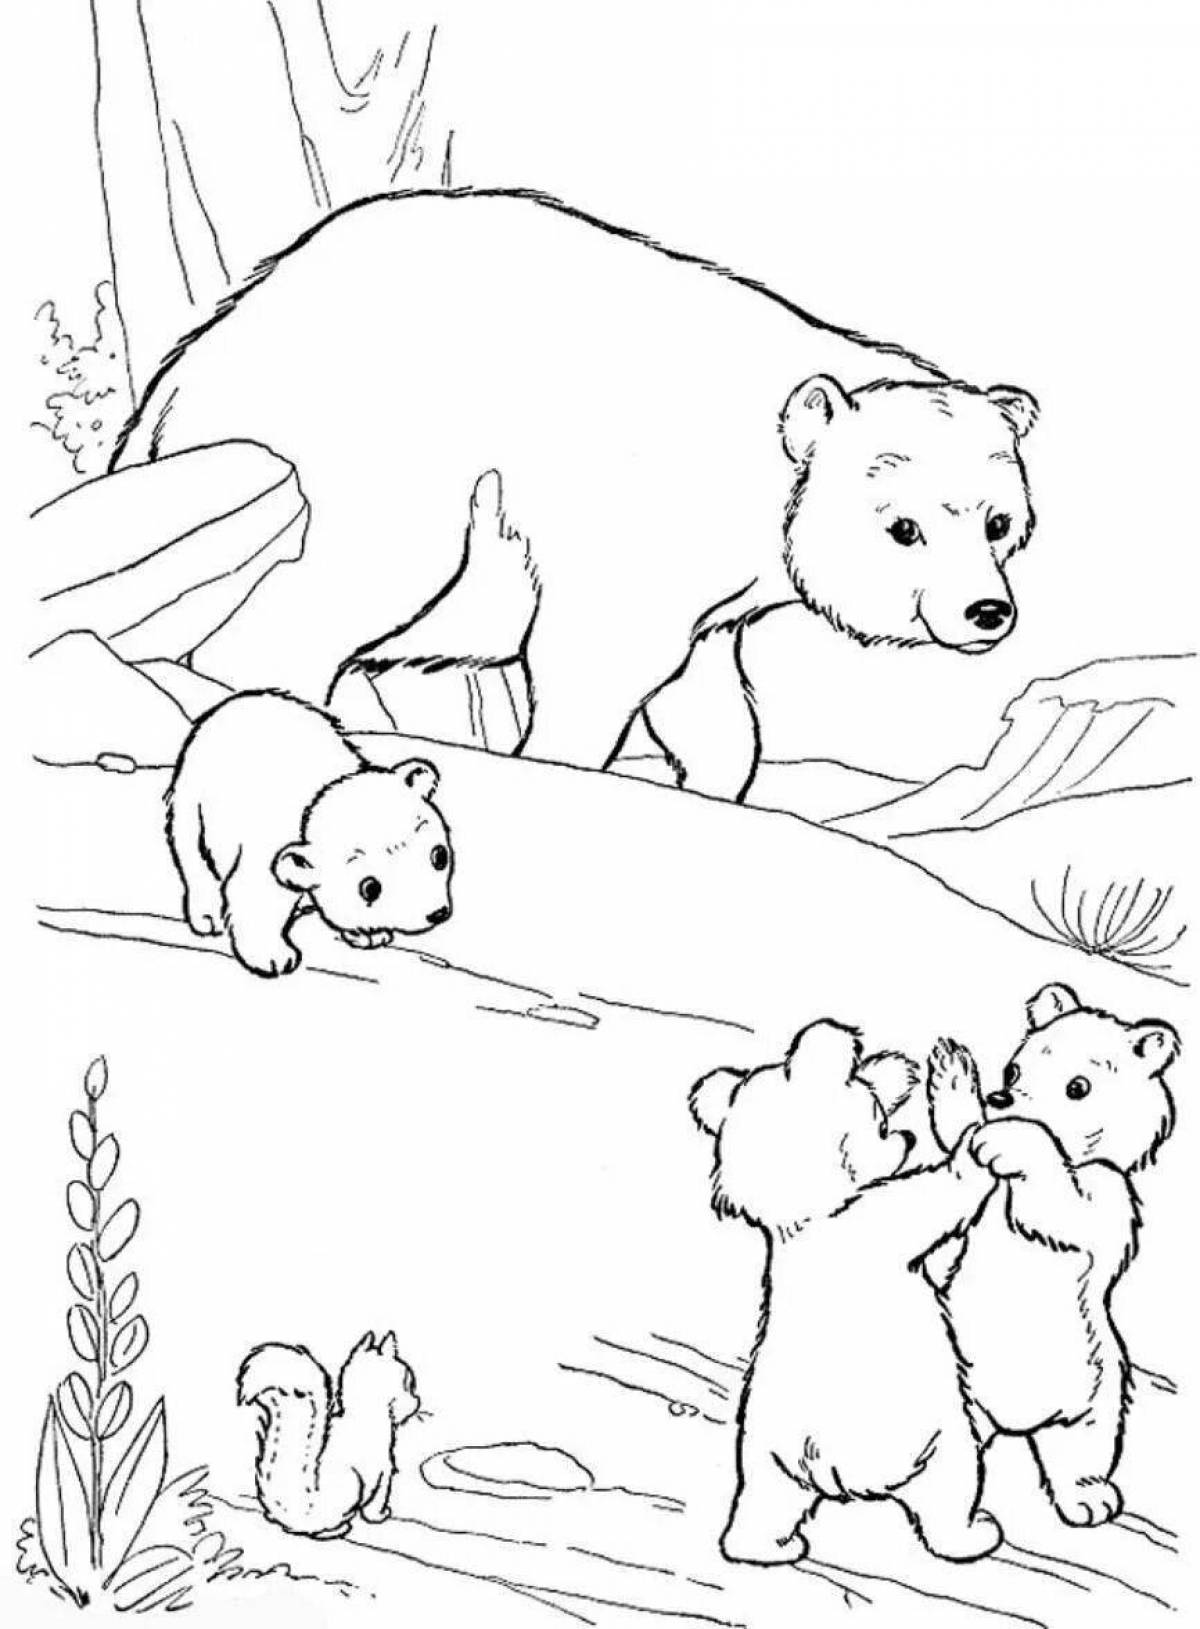 Coloring page gentle teddy bear and cub